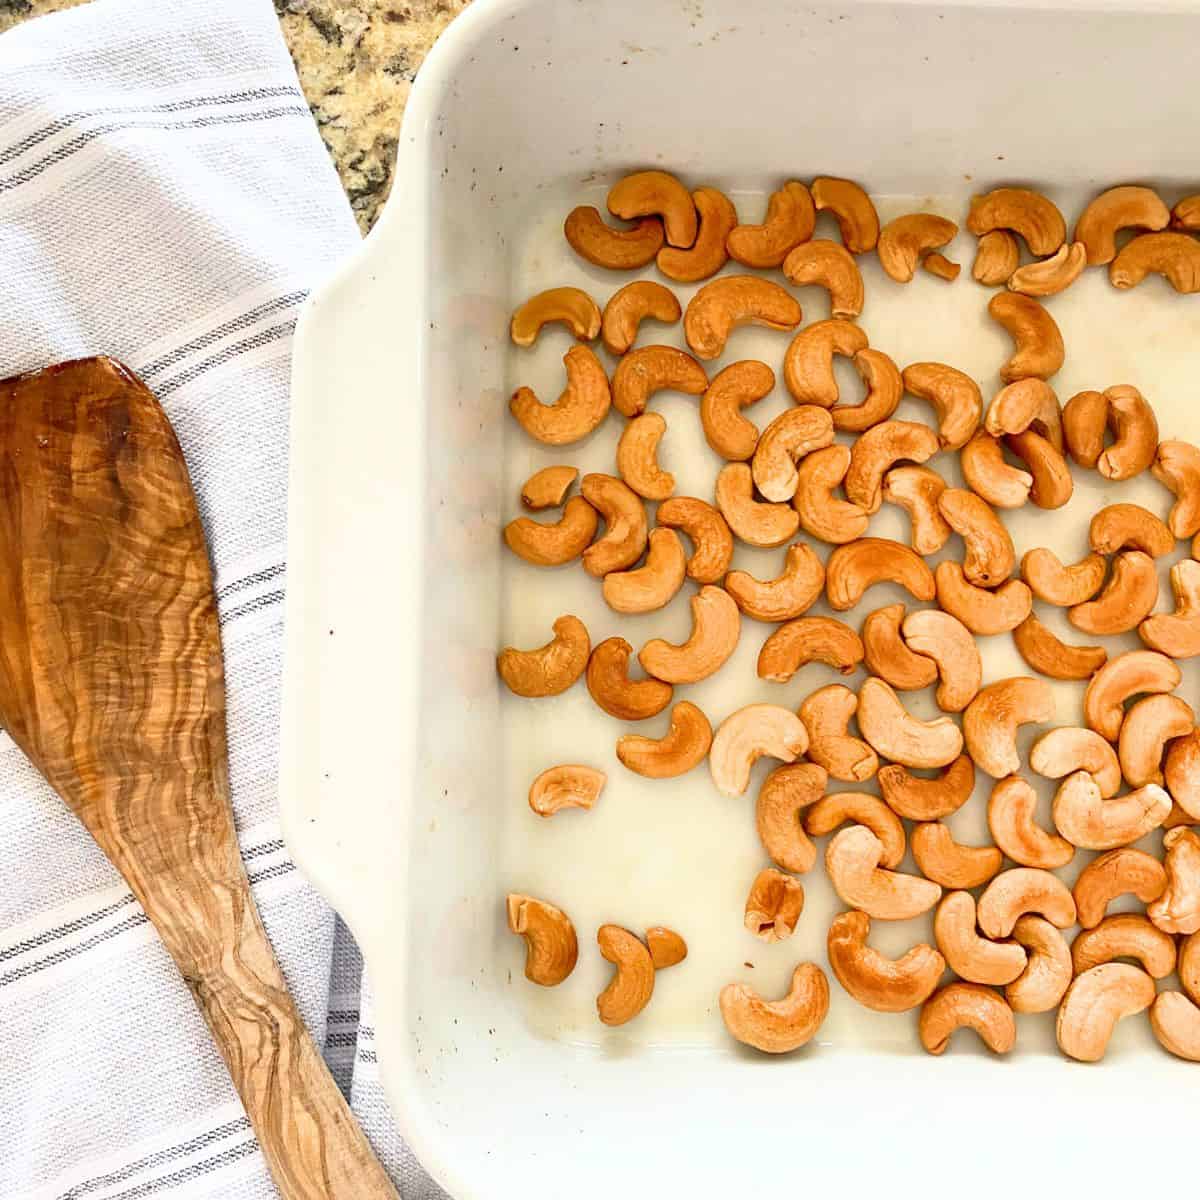 Roasted cashews in a white porcelain roasting pan, with a wooden spatula resting beside on a light colored kitchen towel